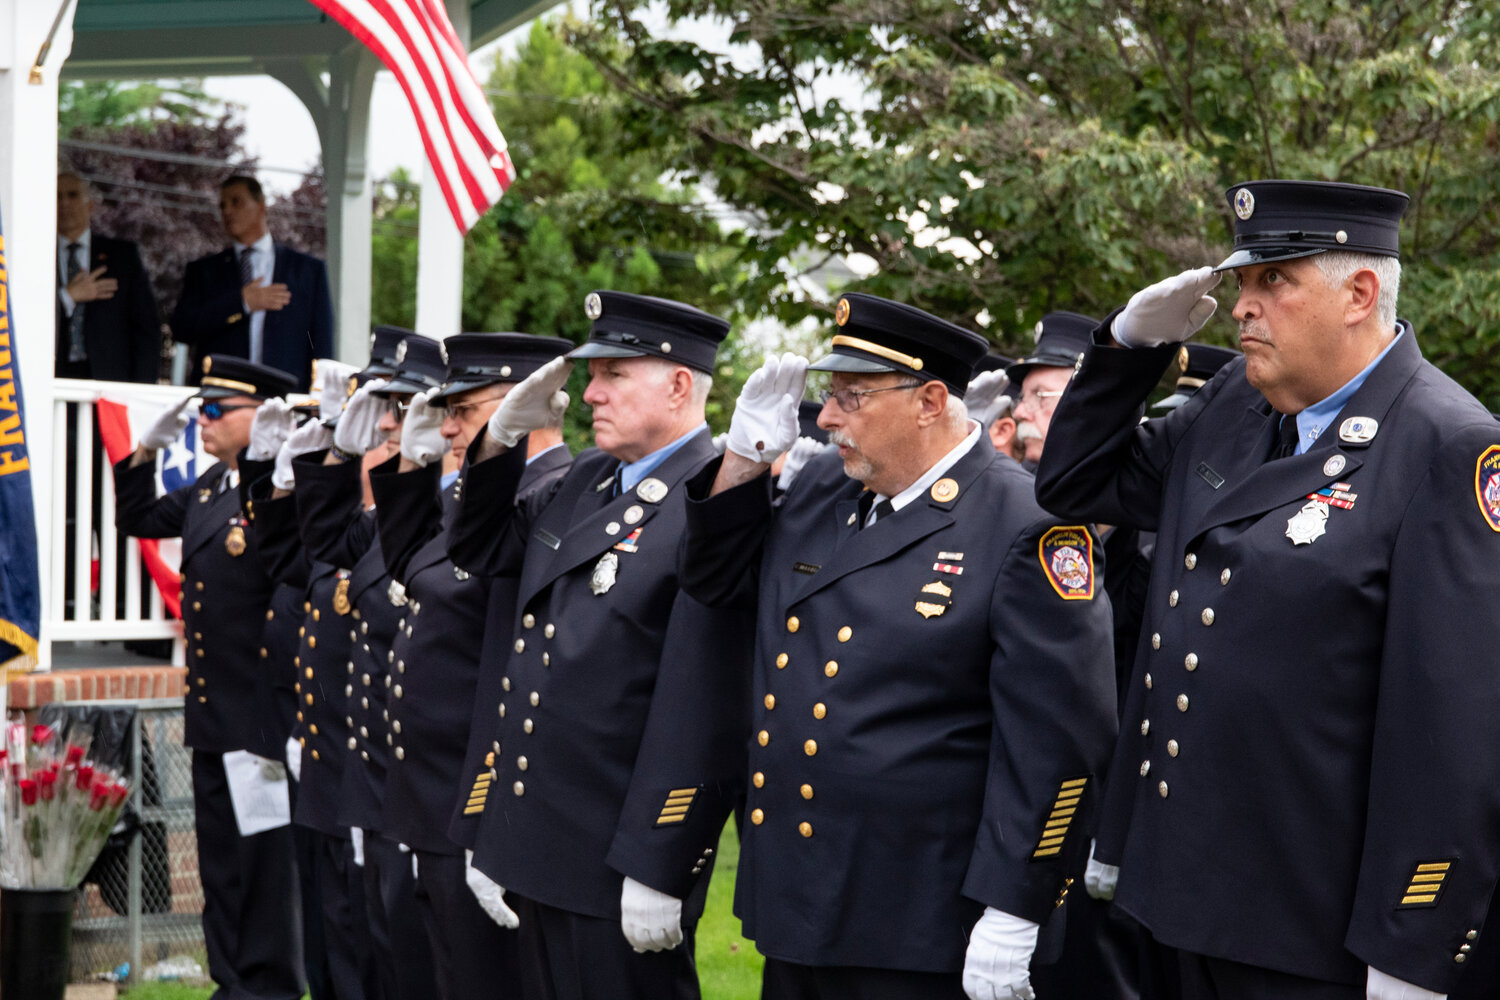 Members of the Franklin Square and Munson Fire Department honored those who died in the terrorist attacks on the World Trade Center on Sept. 11, 2001.